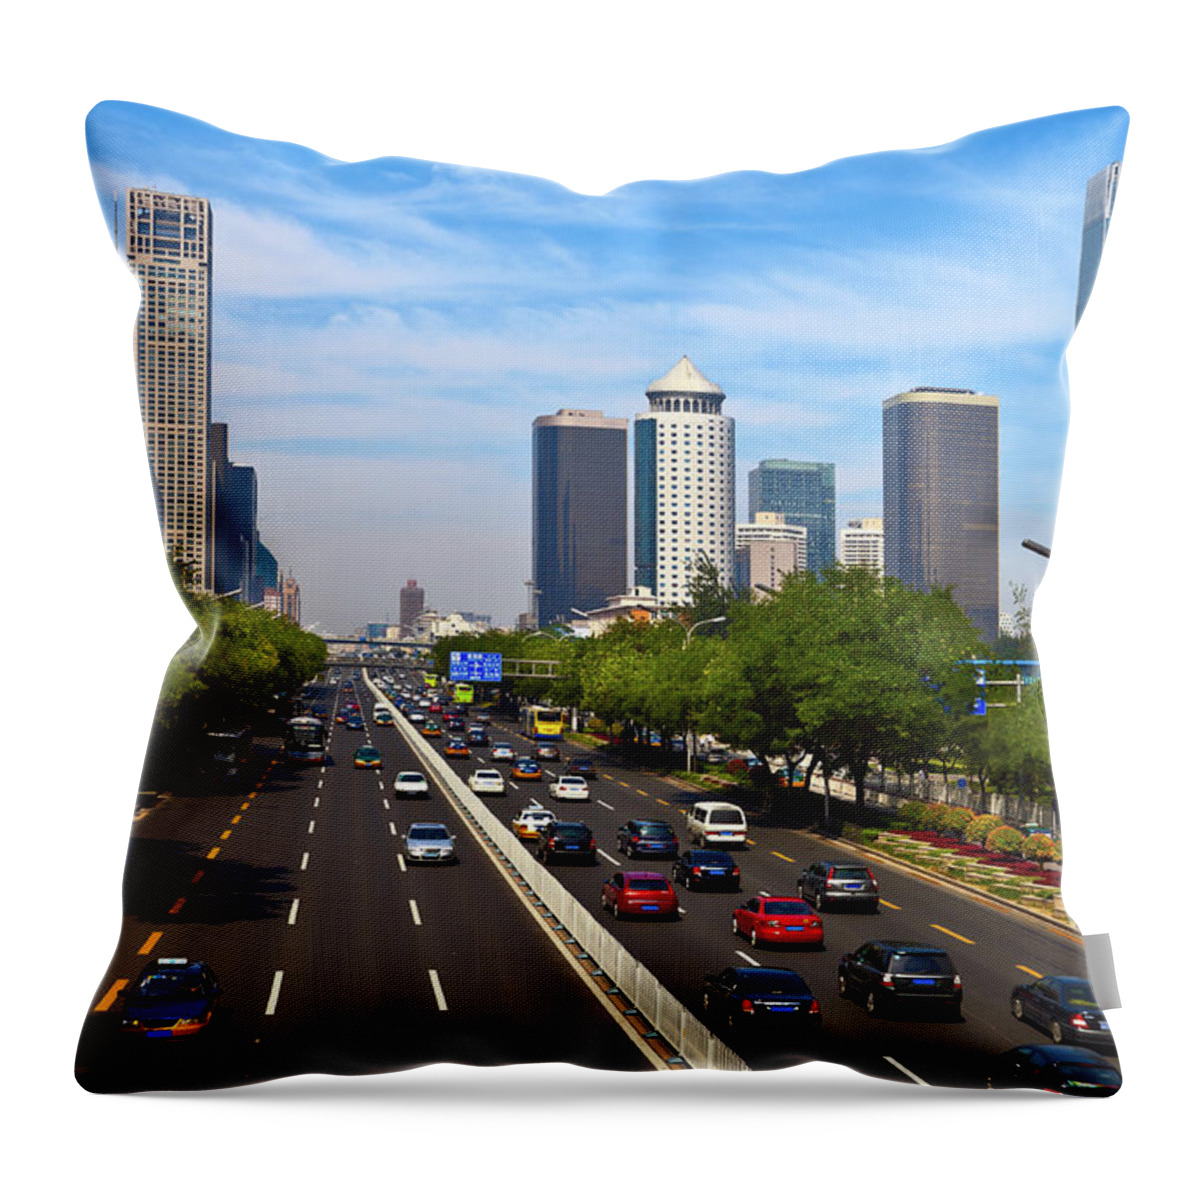 Chinese Culture Throw Pillow featuring the photograph Beijing Downtown District by Ithinksky